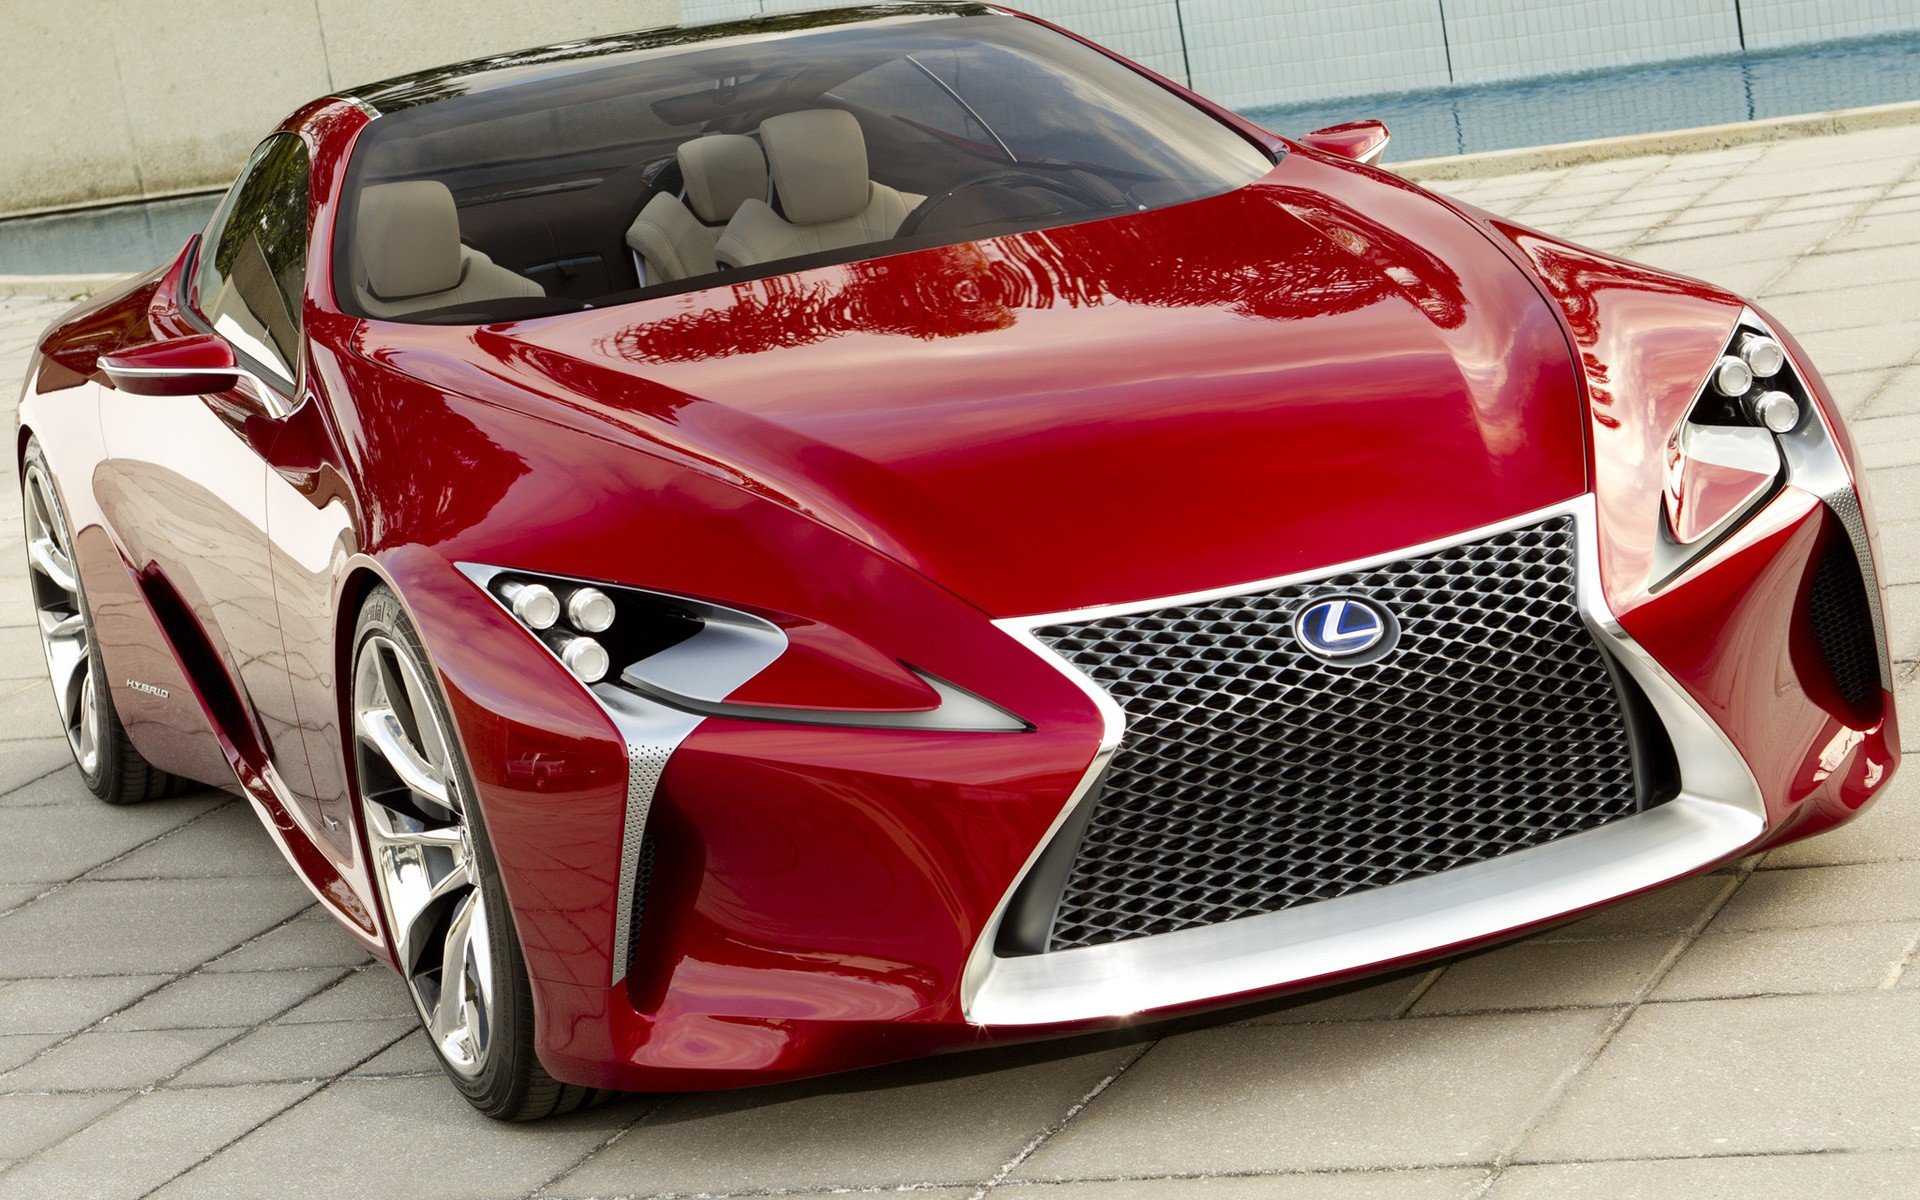 cars, Red, Cars, Lexus, Lf lc, Concept Wallpaper